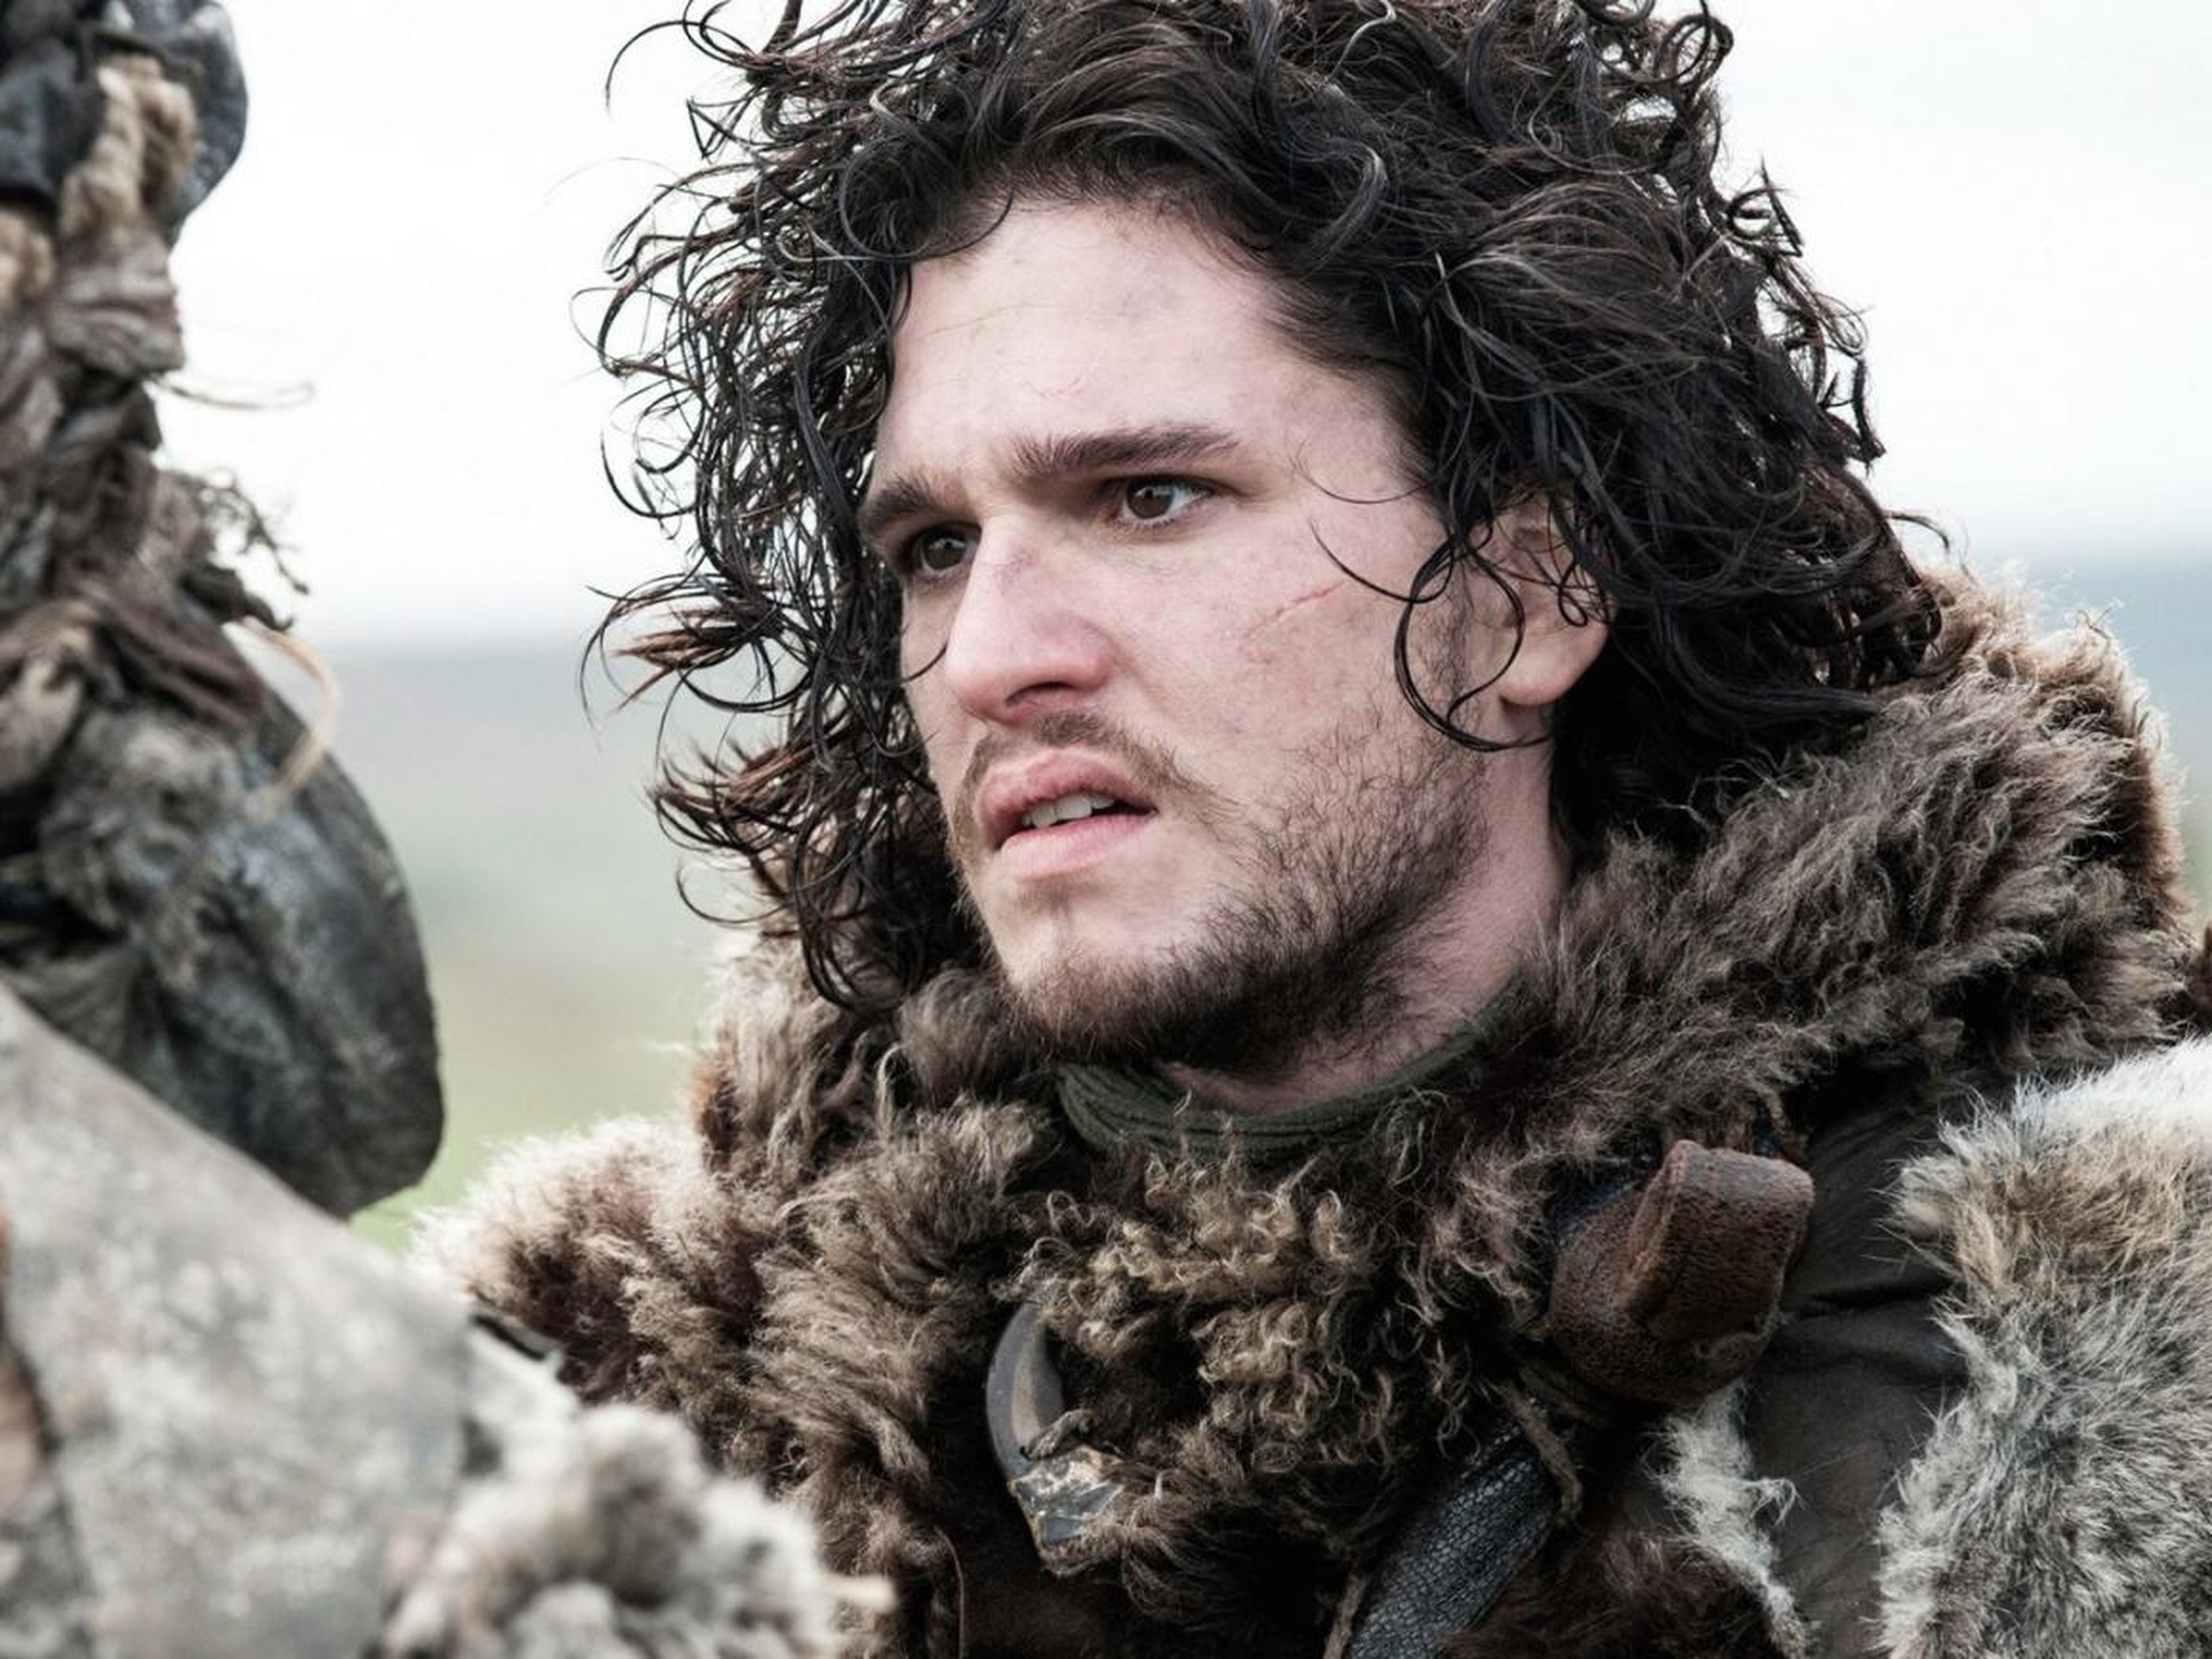 Jon Snow in HBO's "Game Of Thrones" adaptation.